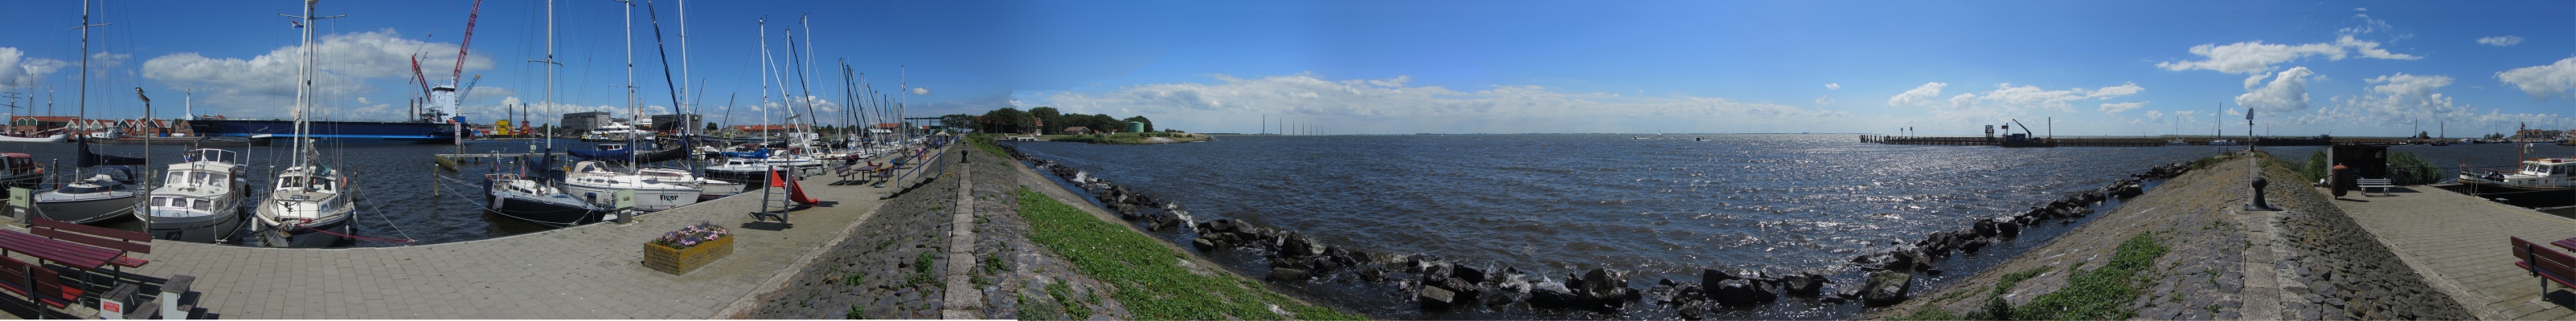 view_from_urk_marina